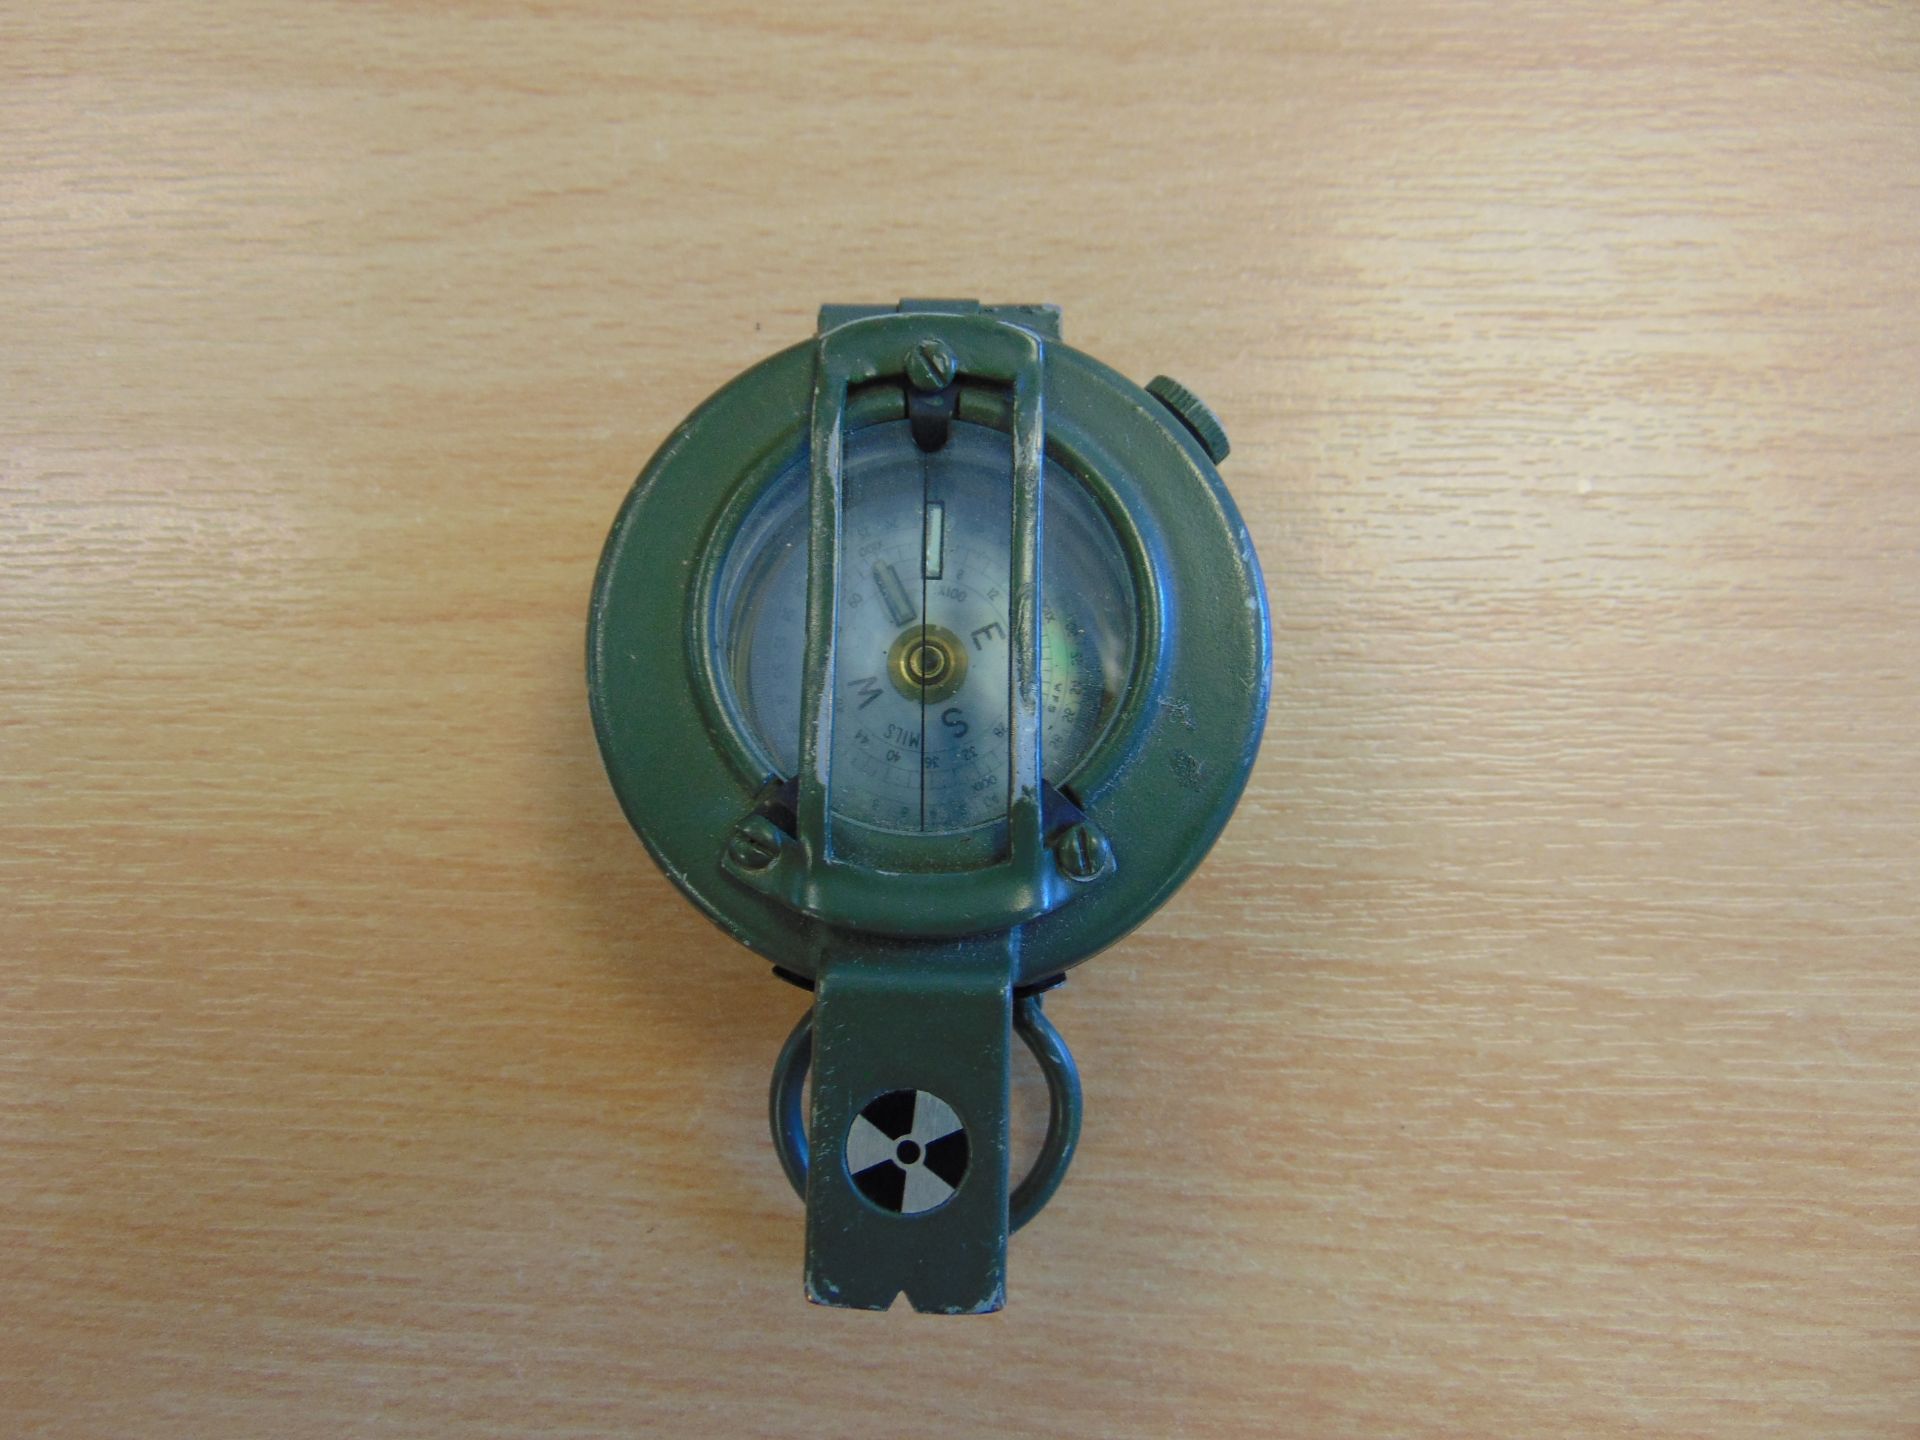 Stanley London British Army Brass Prismatic Compass in Mils, Nato Marks - Image 2 of 3